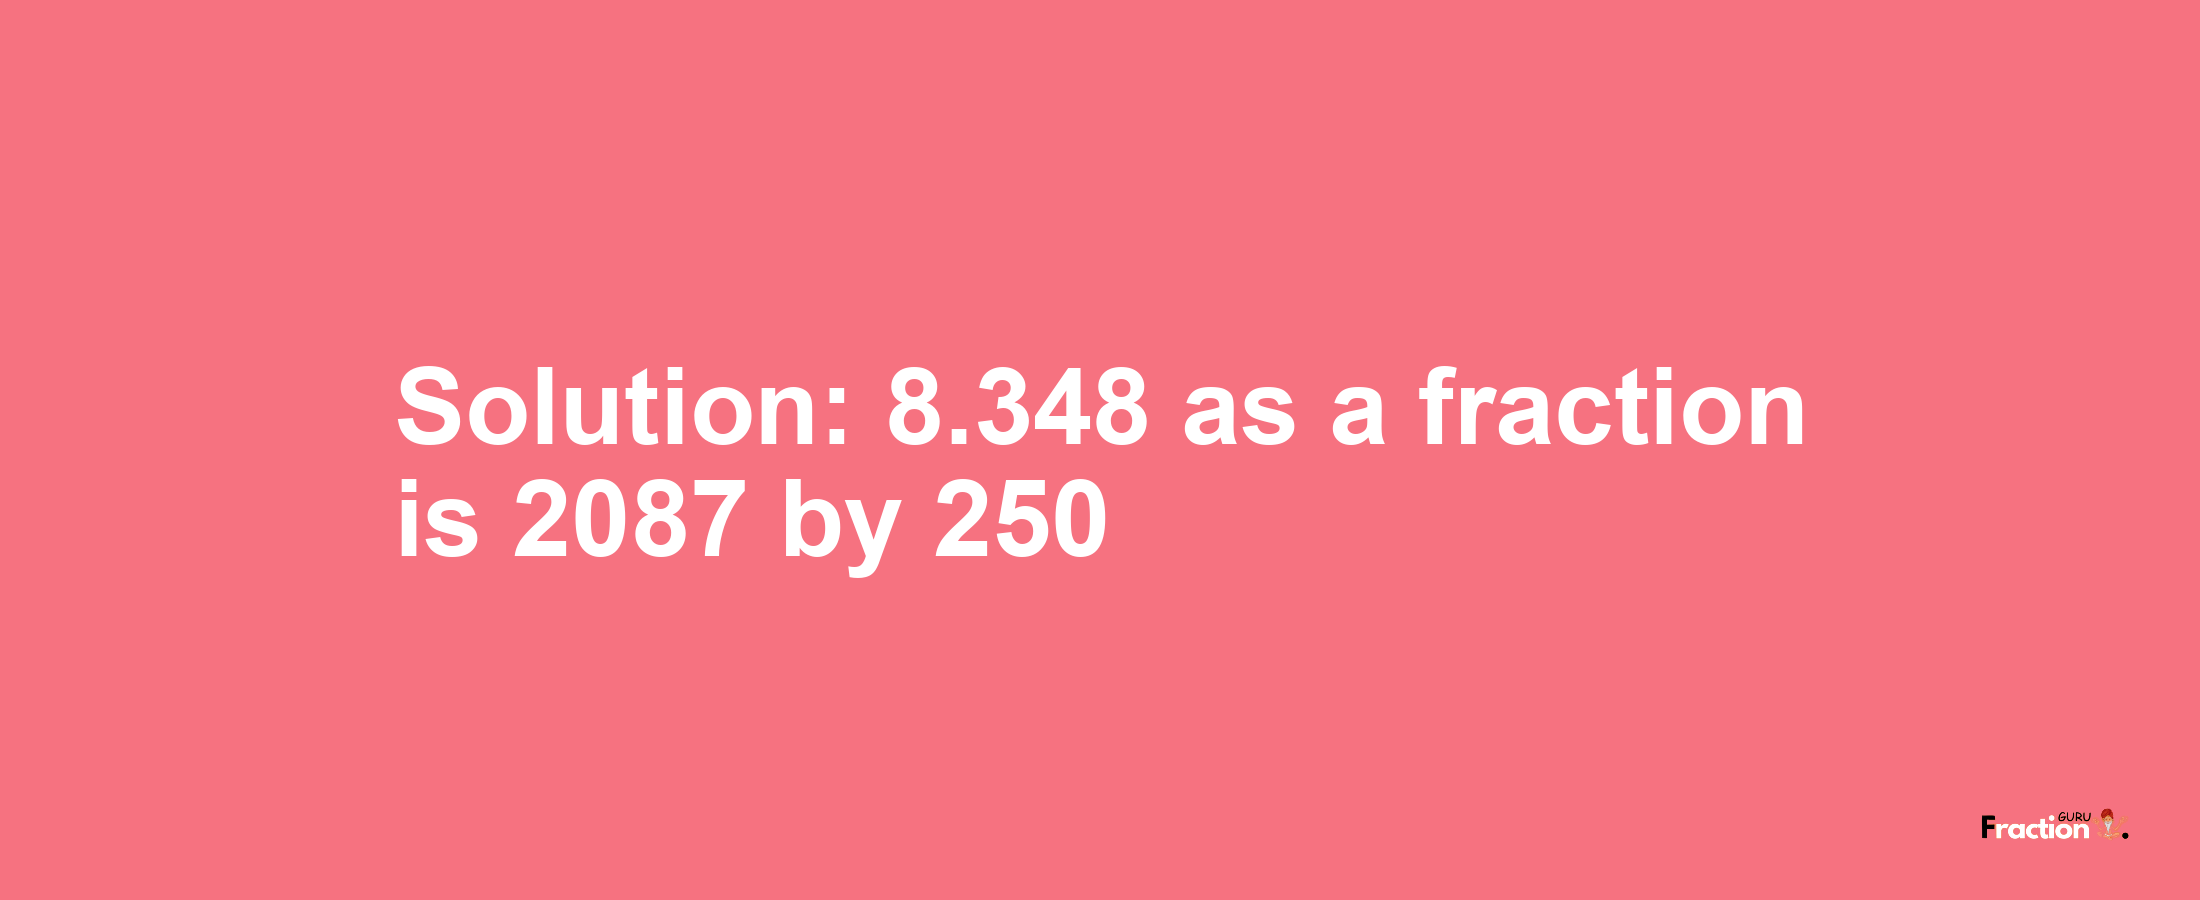 Solution:8.348 as a fraction is 2087/250